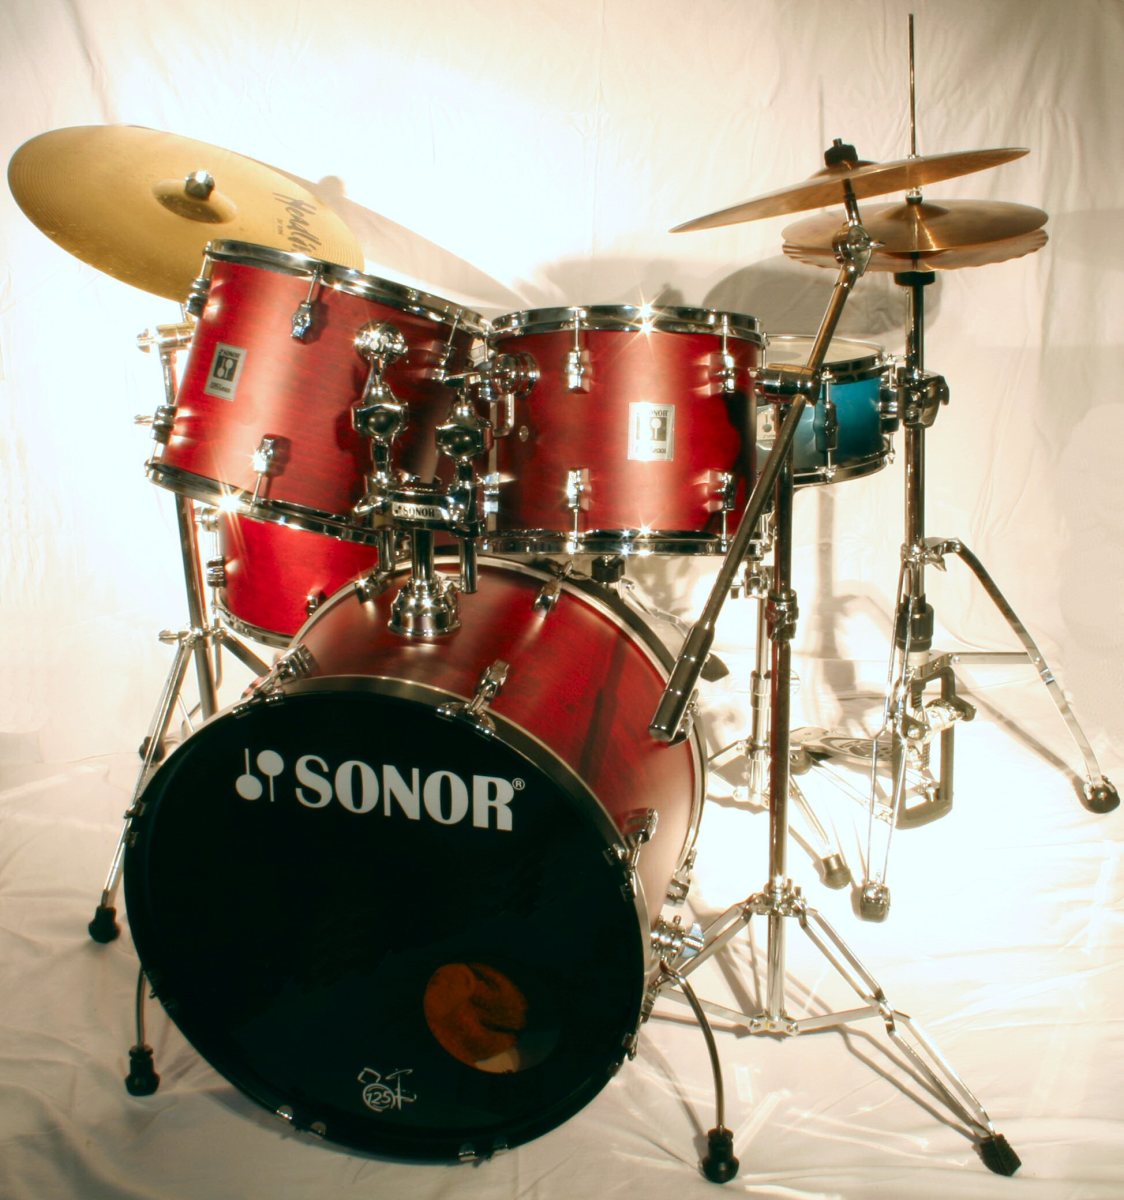 Making a homemade drum set is easier than you think!